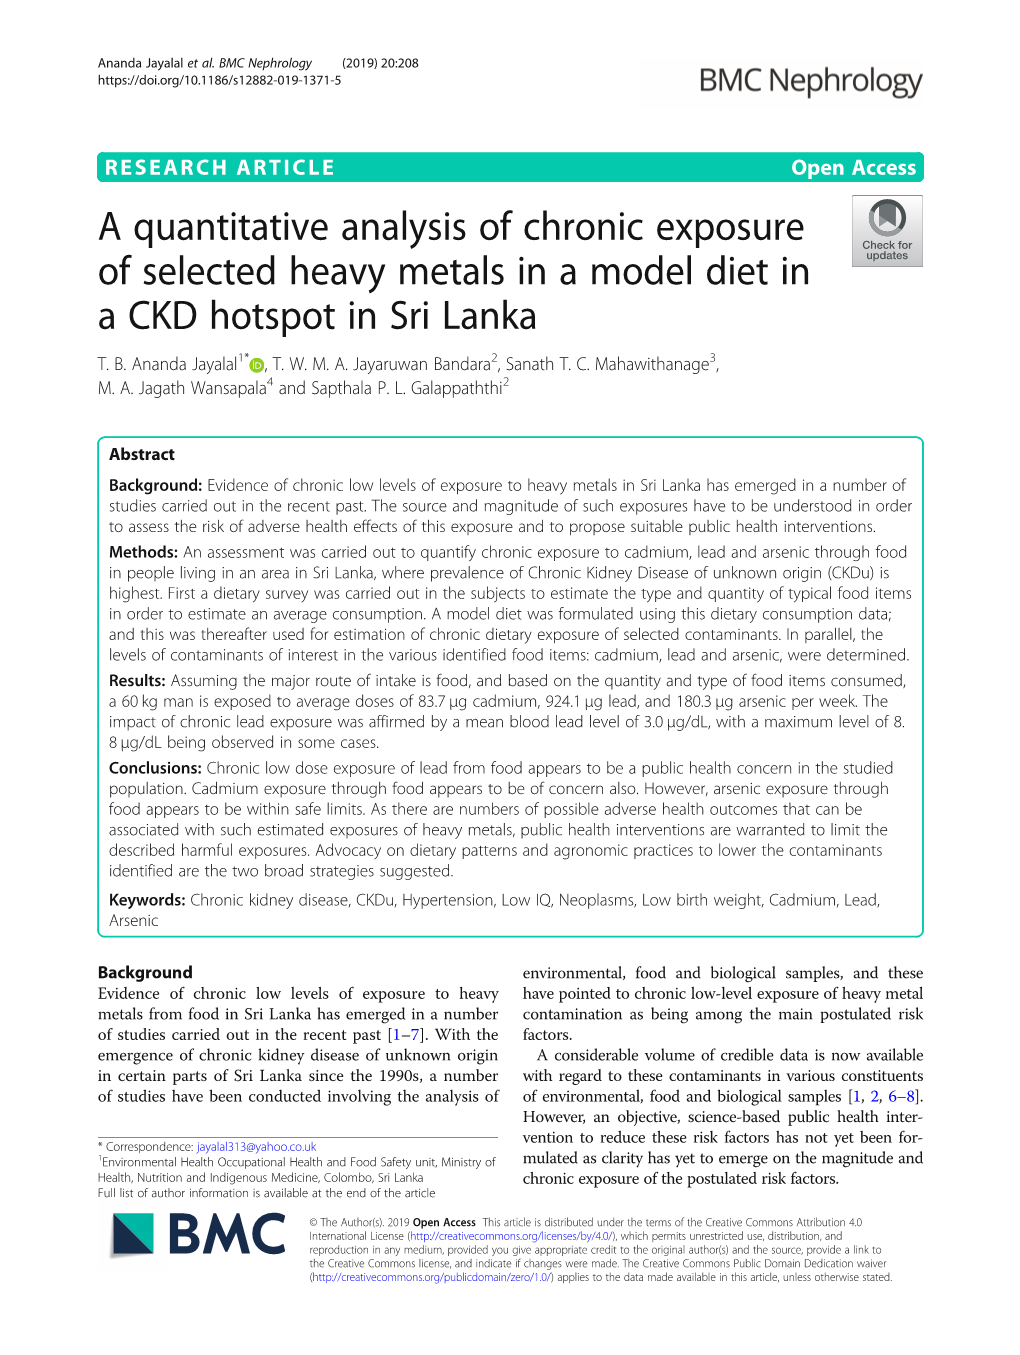 A Quantitative Analysis of Chronic Exposure of Selected Heavy Metals in a Model Diet in a CKD Hotspot in Sri Lanka T